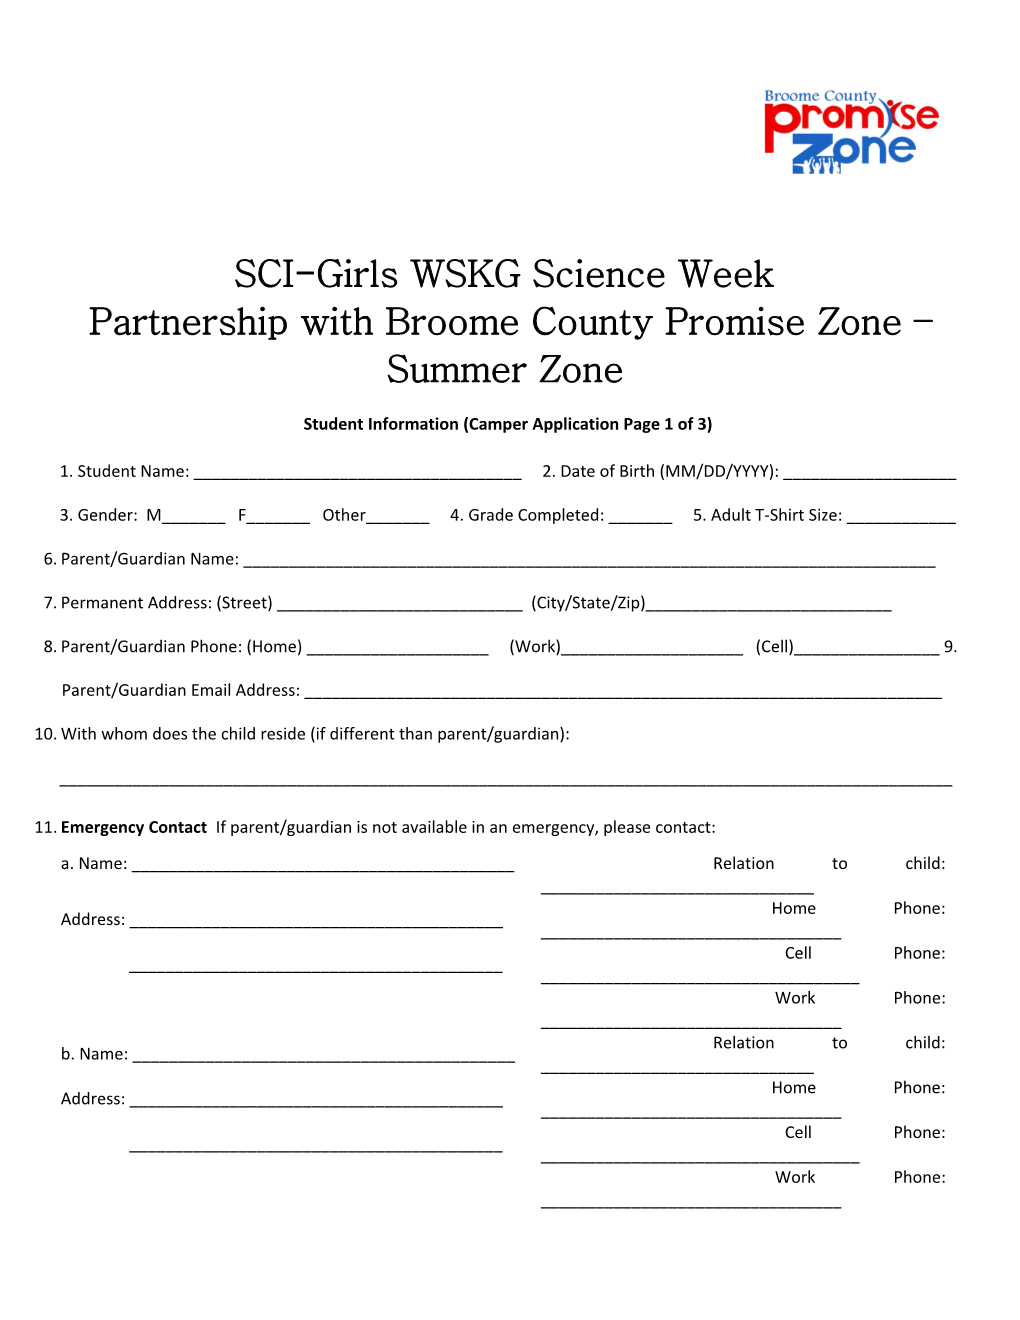 Partnership with Broome County Promise Zone Summer Zone